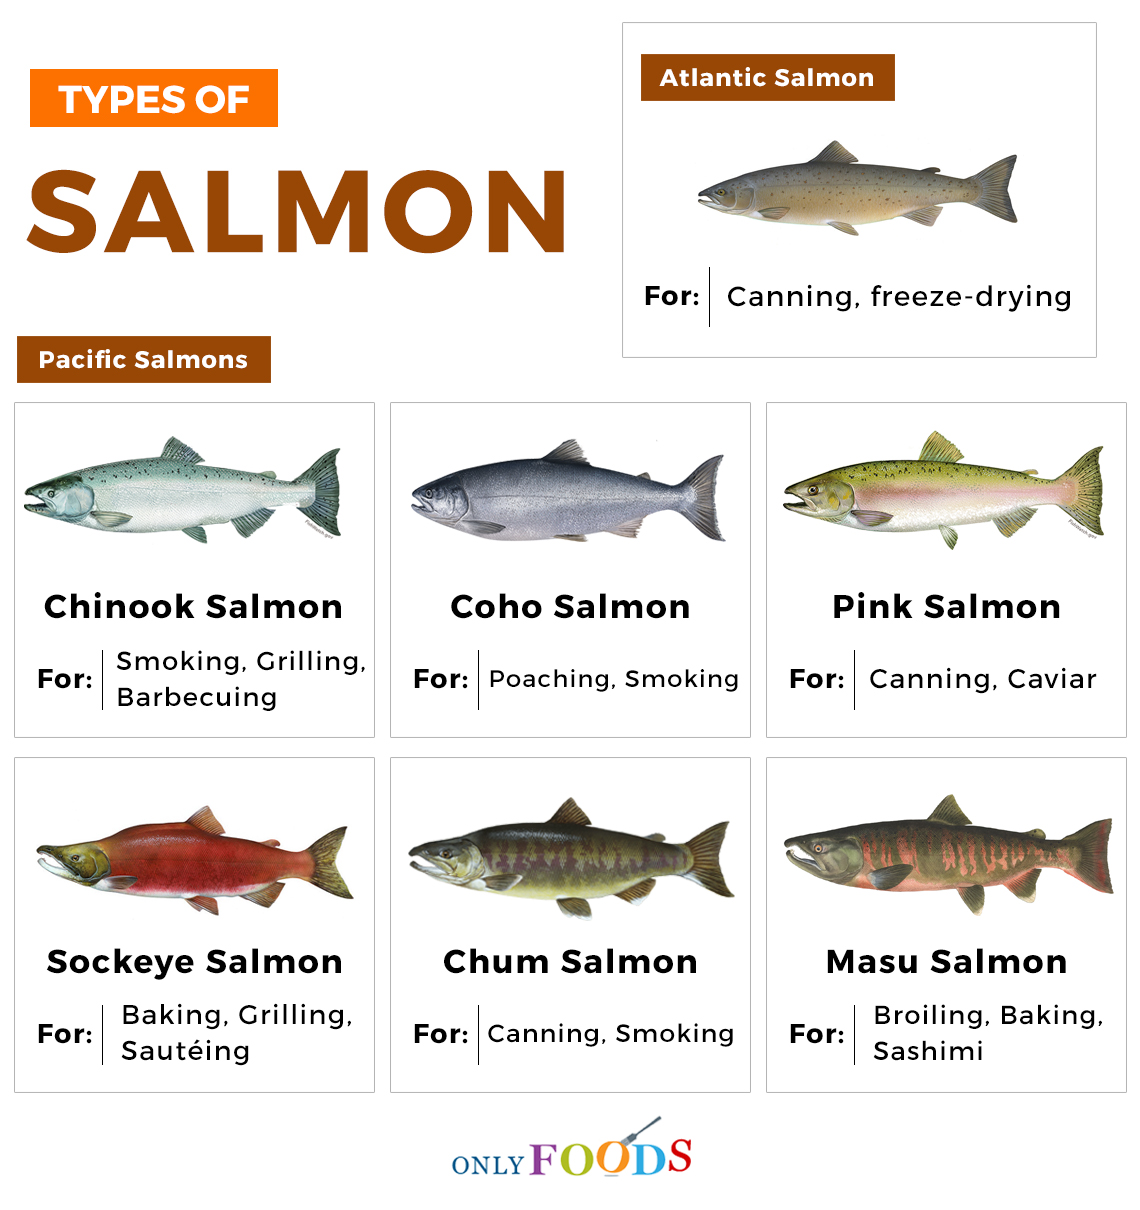 What Types of Salmon Are Found in Alaska?